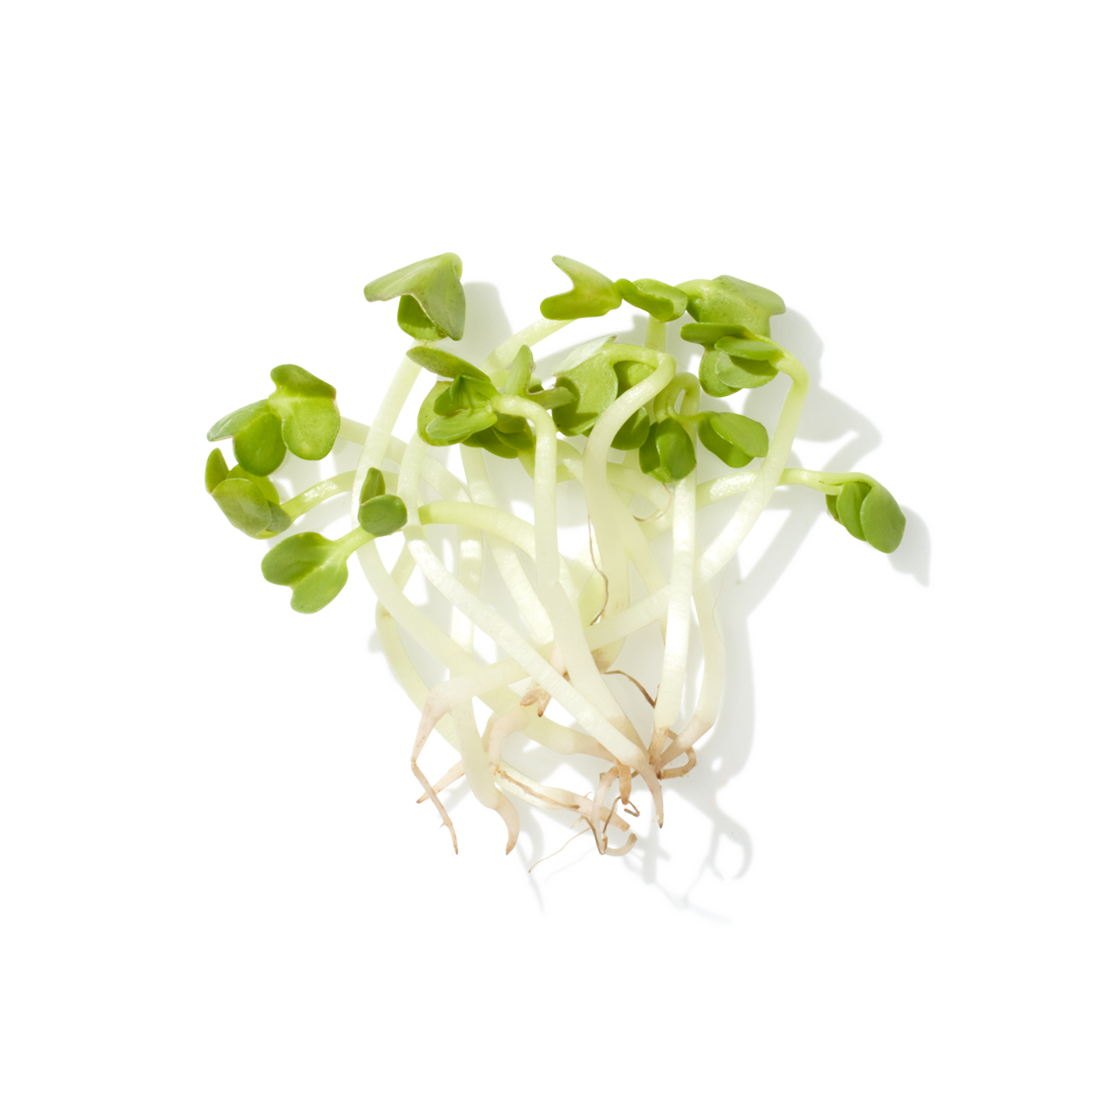 NZ Broccoli Sprout